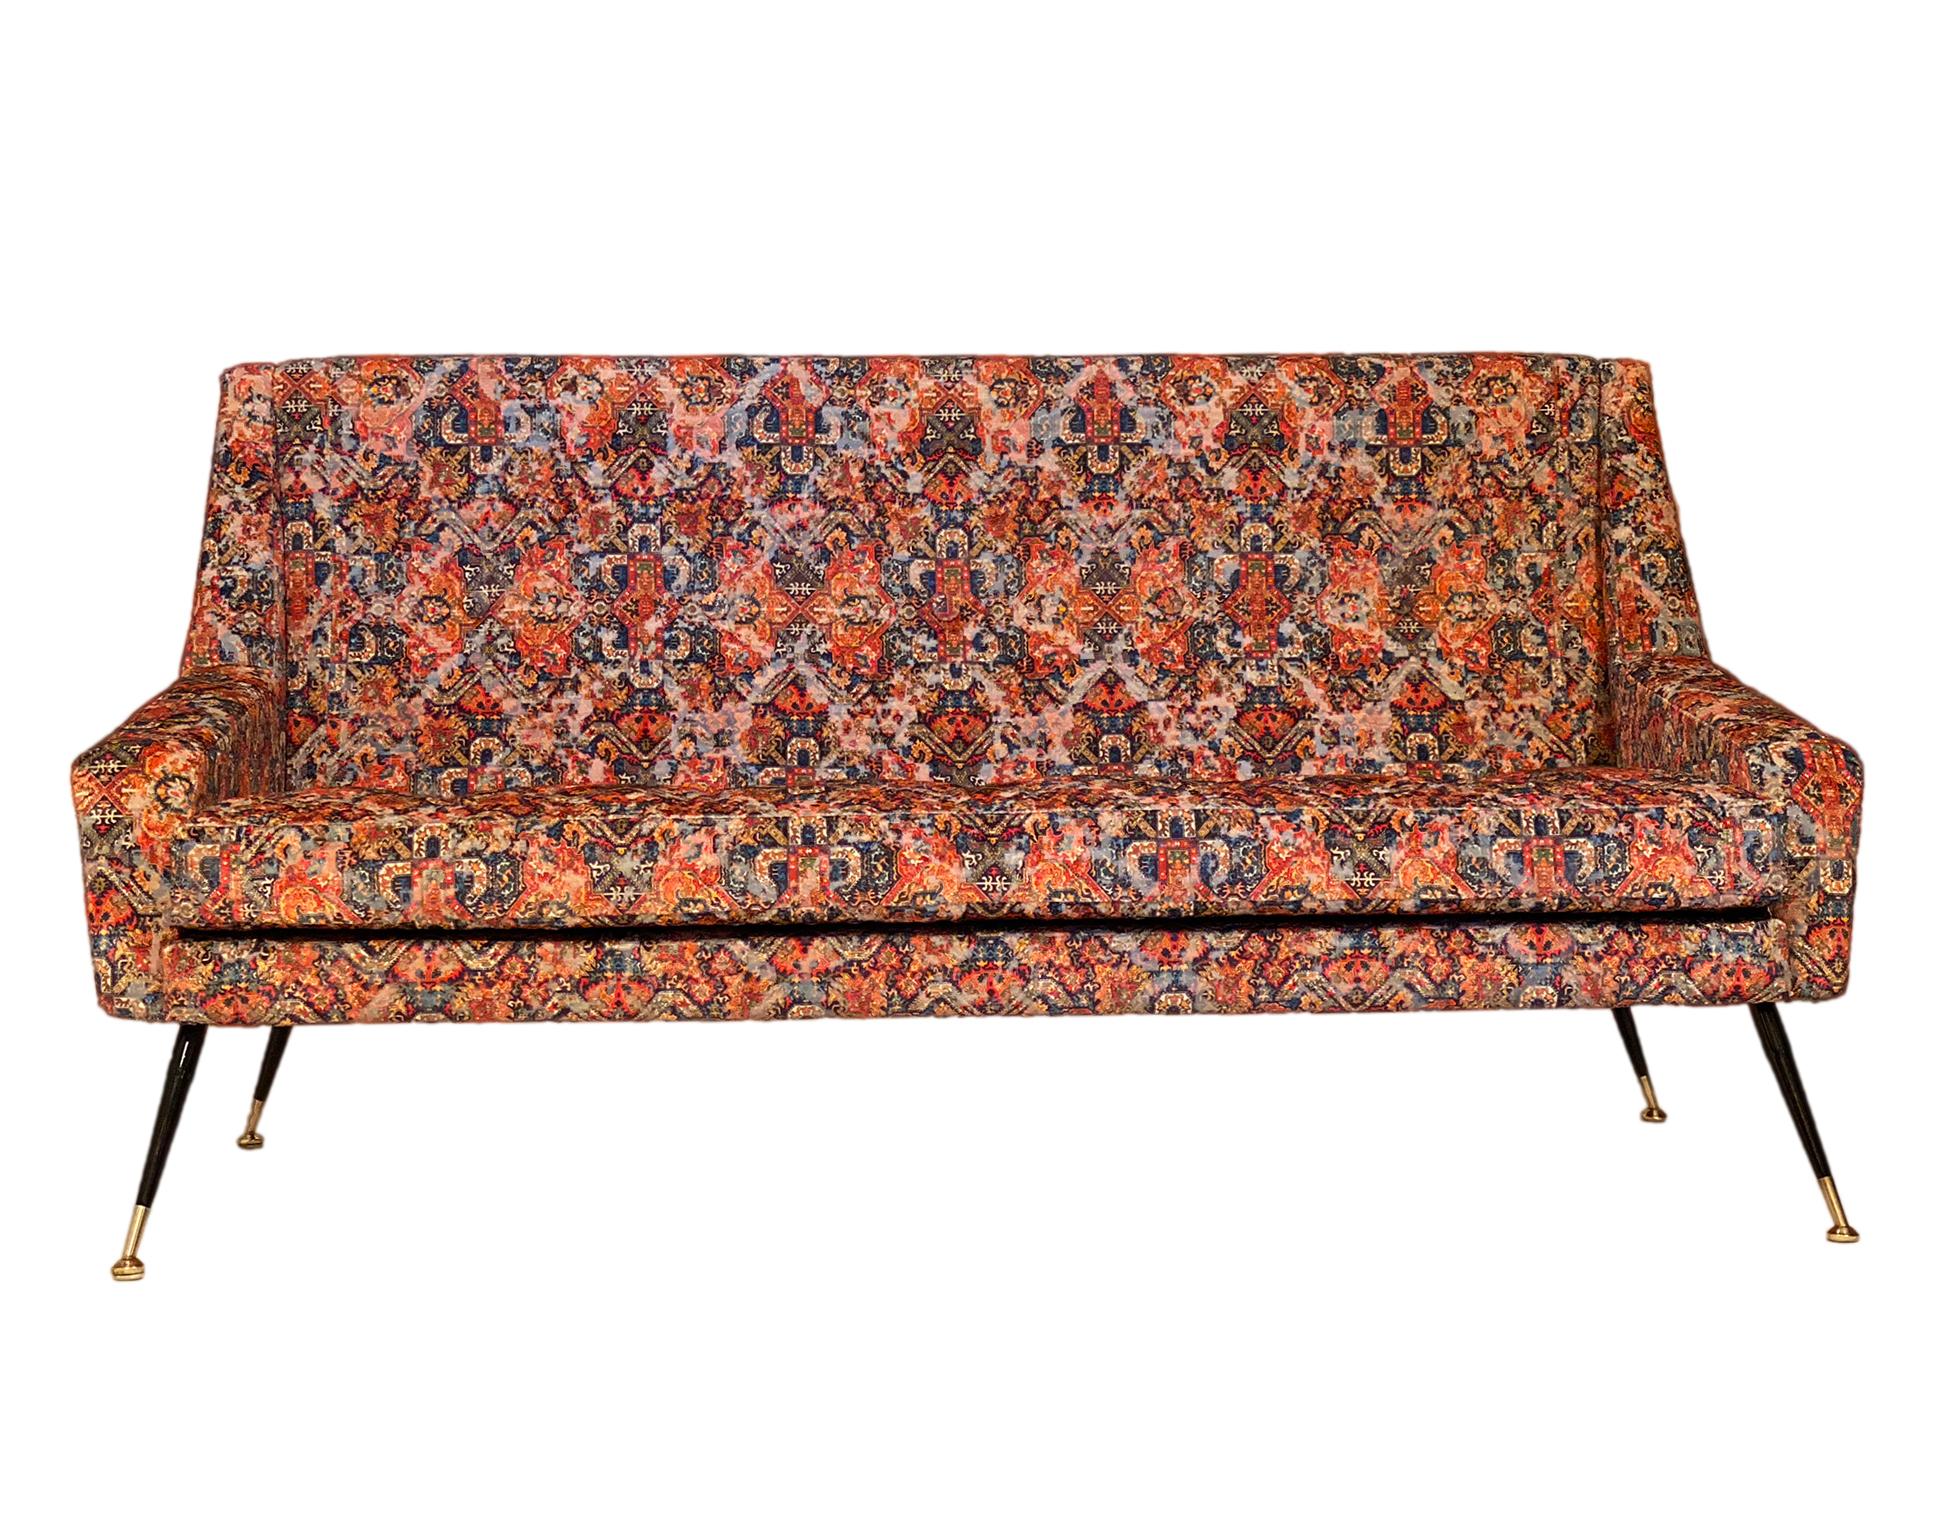 Vintage Italian sofa from Milan featuring unique Rubelli fabric mimicking an antique worn Persian rug. Steel and brass legs support this piece. We love this bold piece!